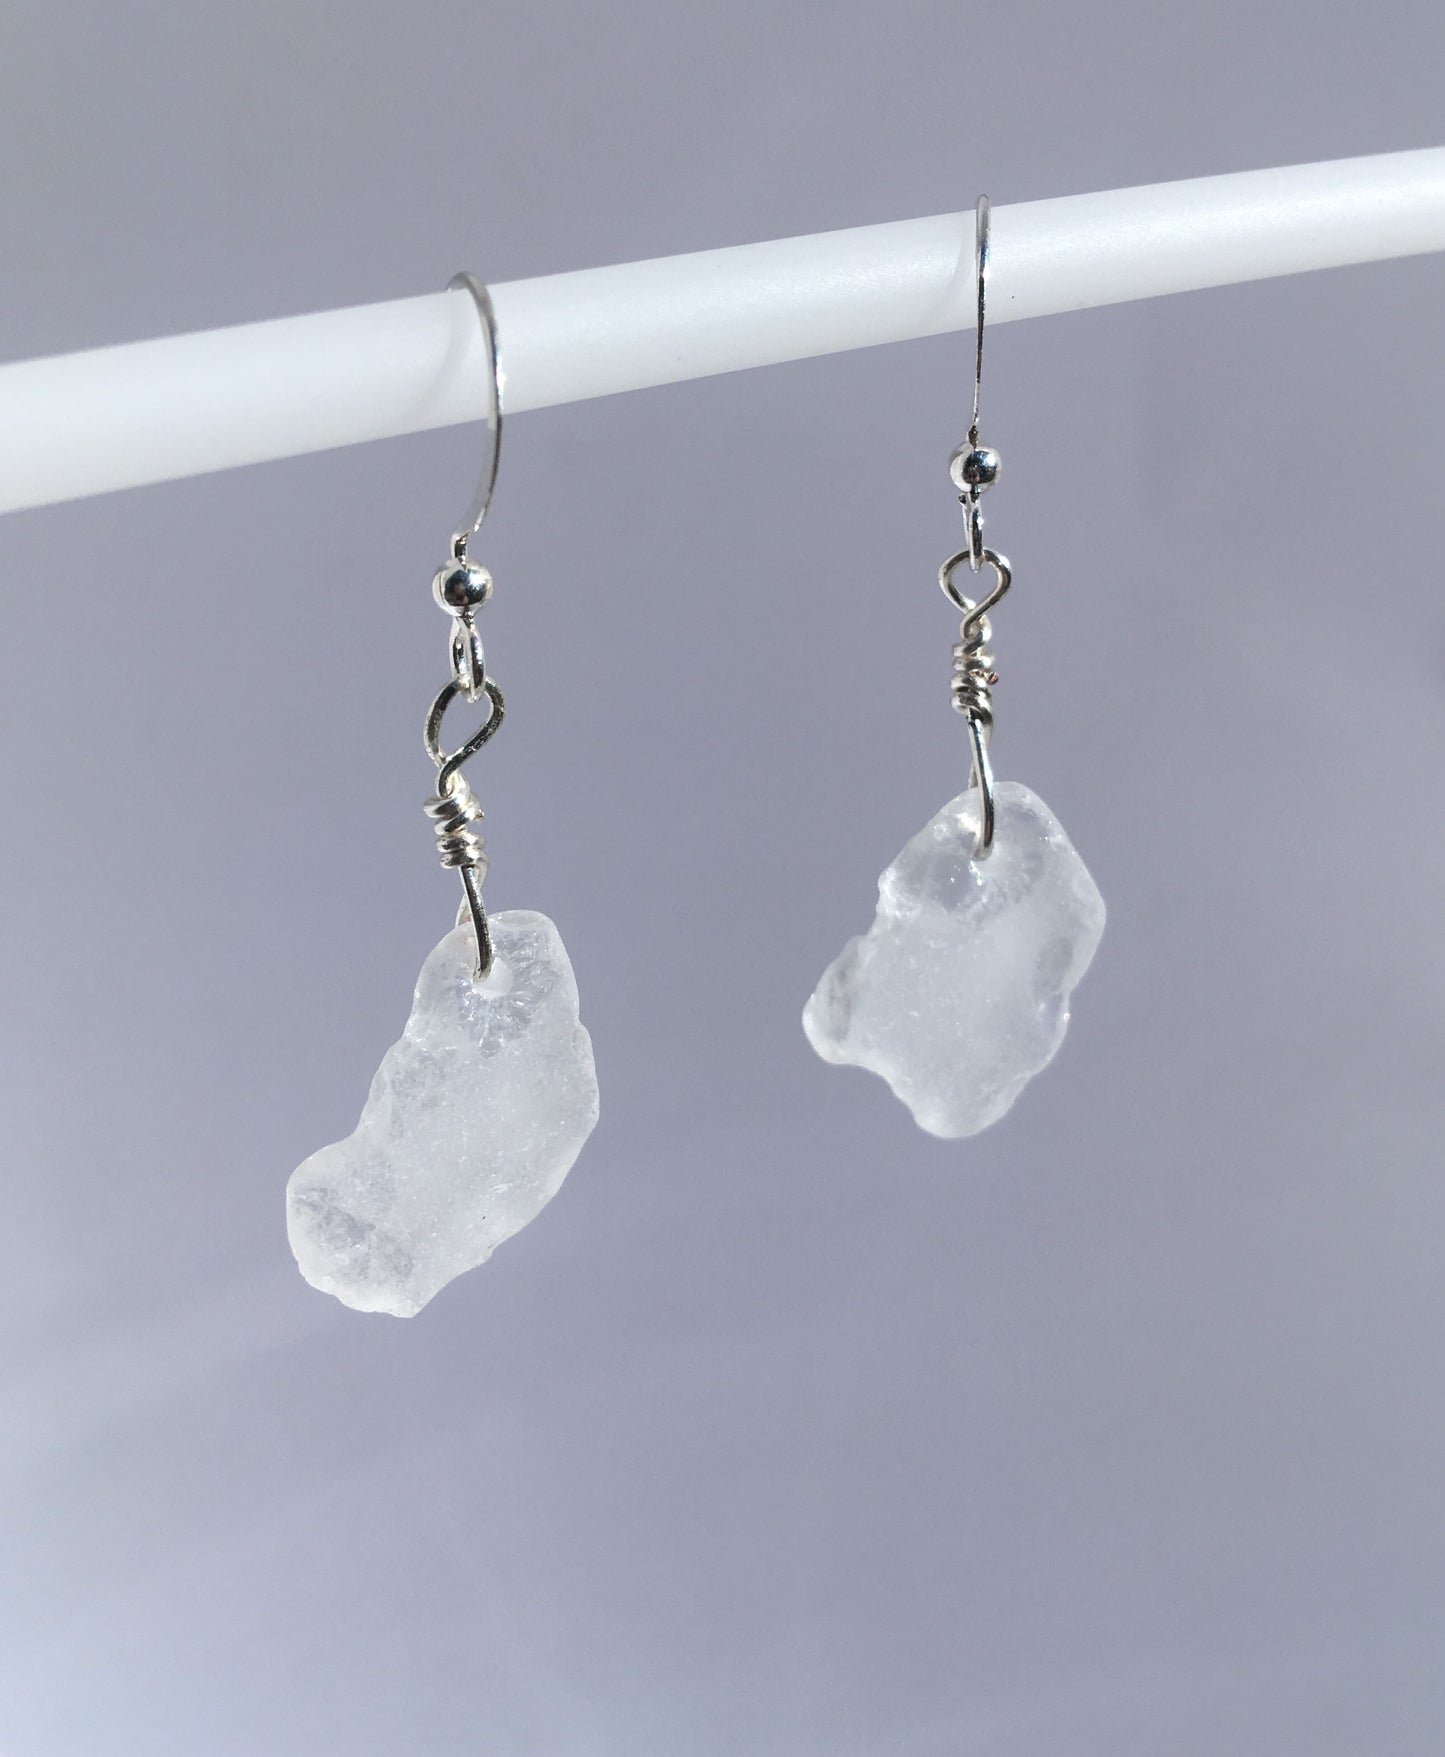 Shoreline Earrings: White sea glass from the South Shore of Nova Scotia, Canada on a hypoallergenic nickle-free hook